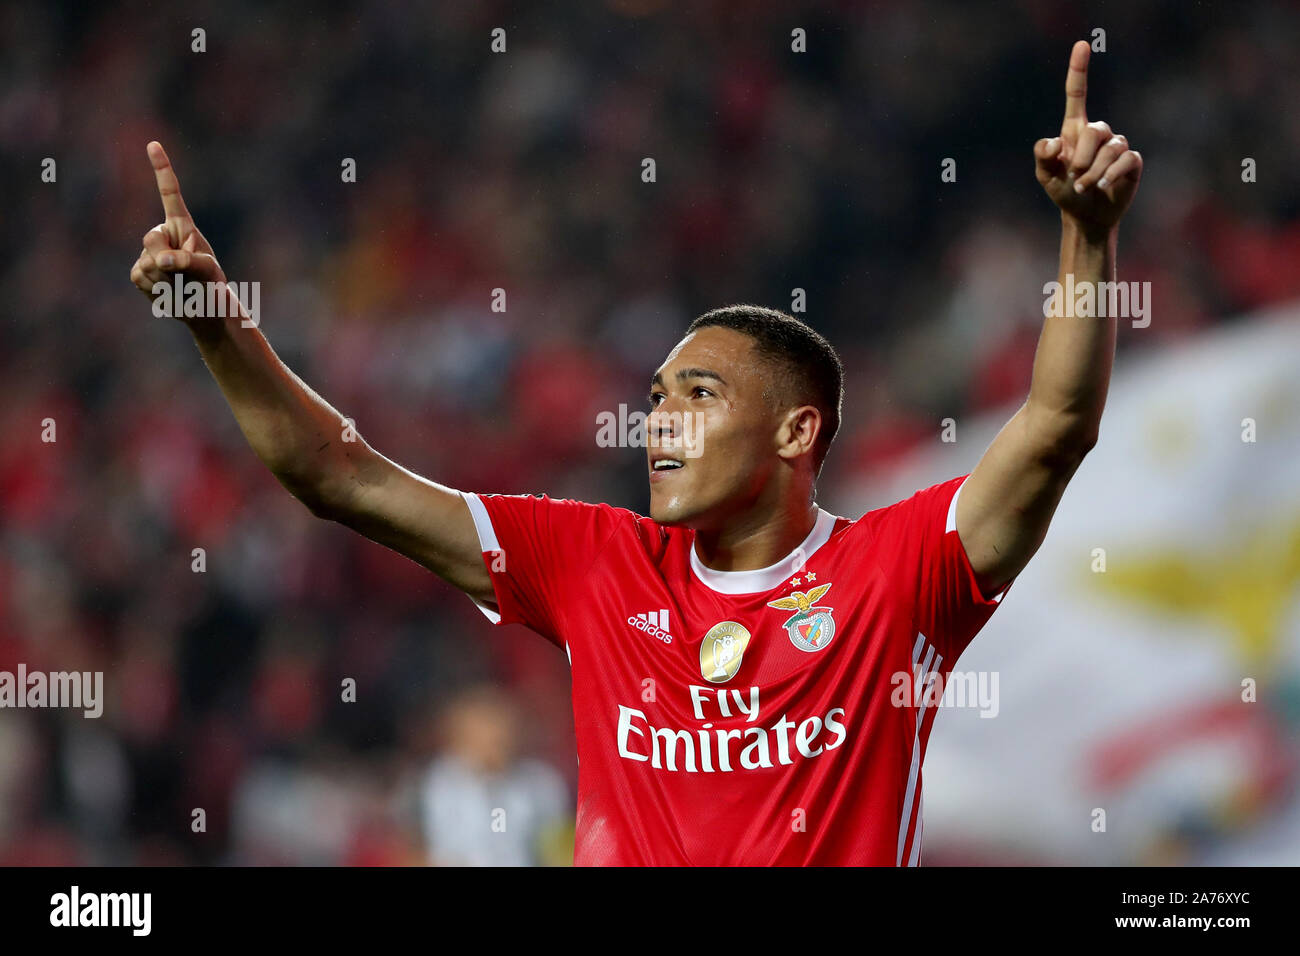 Lisbon, Portugal. 30th Oct, 2019. during the Portuguese League football  match between SL Benfica and Portimonense